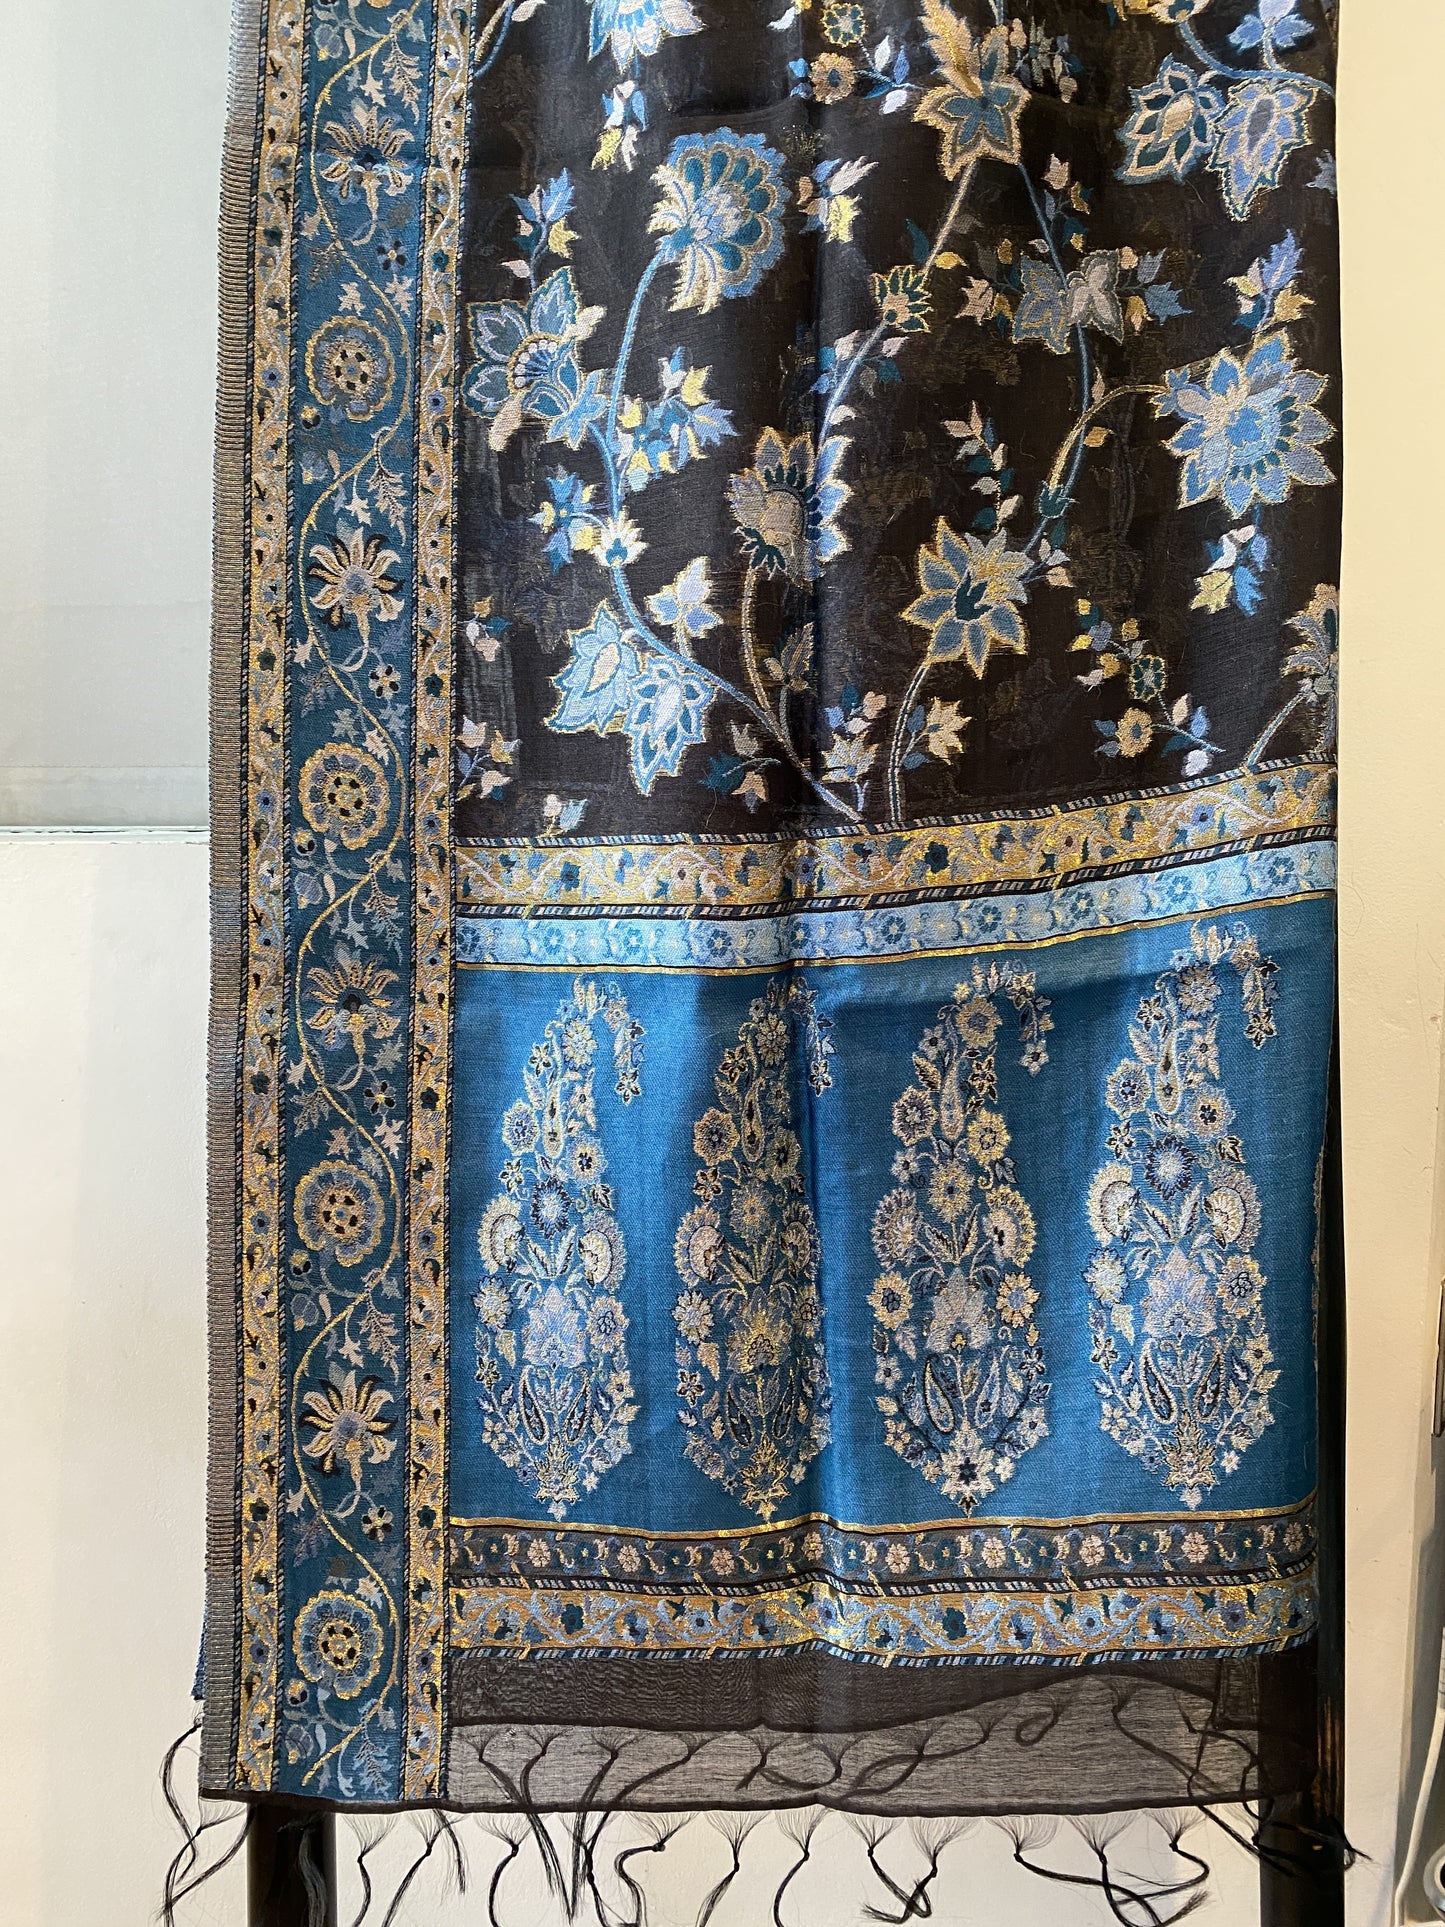 Kani Design Silk Saree Shawl in Blue and Black with Golden line and Flower pattern